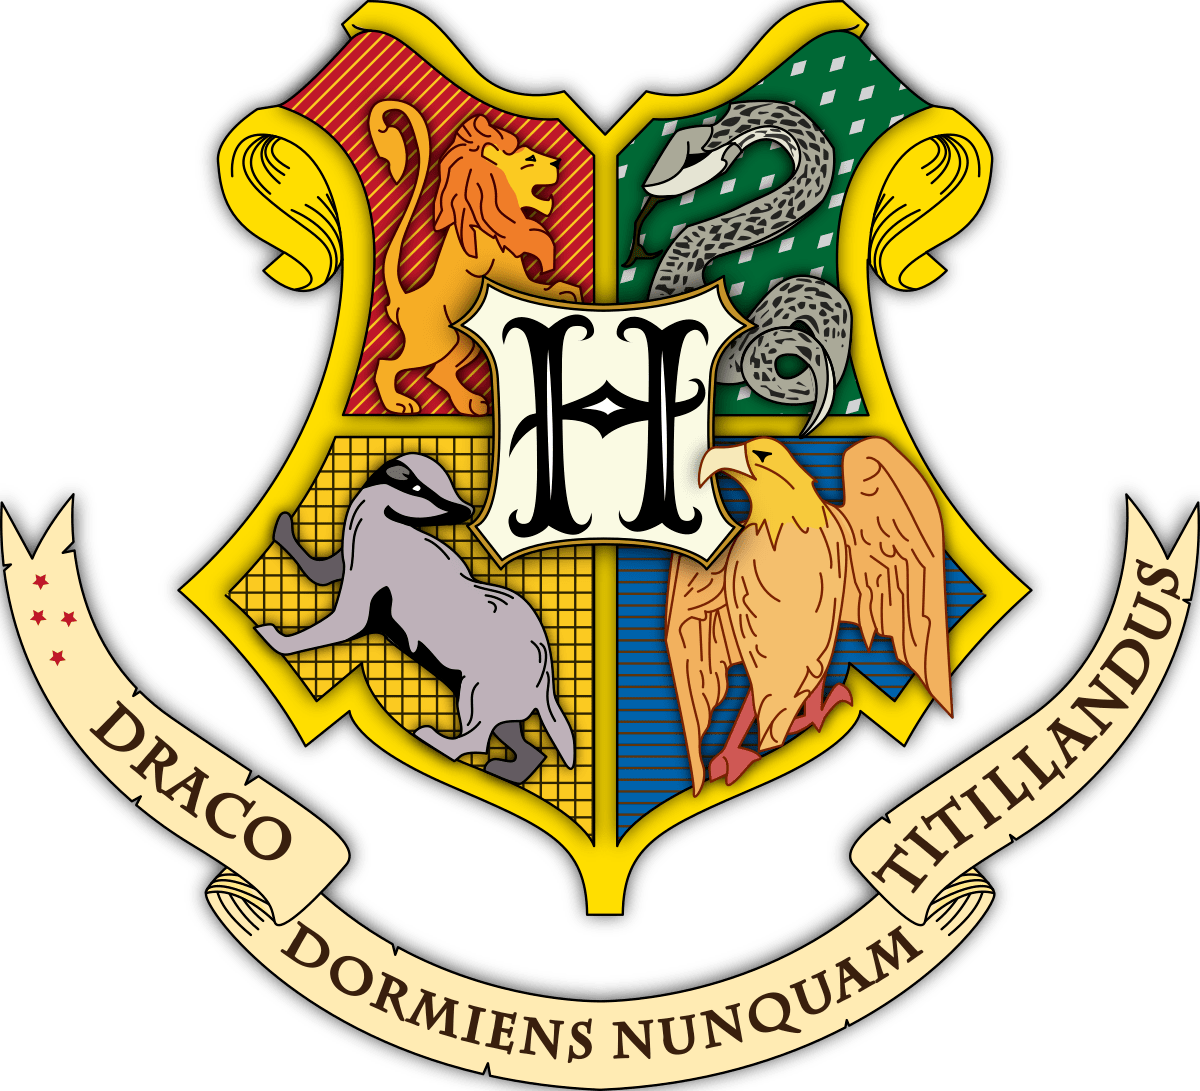 Draco Dormiens Nunquam Titillandus Logo 3 By Michelle - Hogwarts School Of Witchcraft And Wizardry (1200x1091)